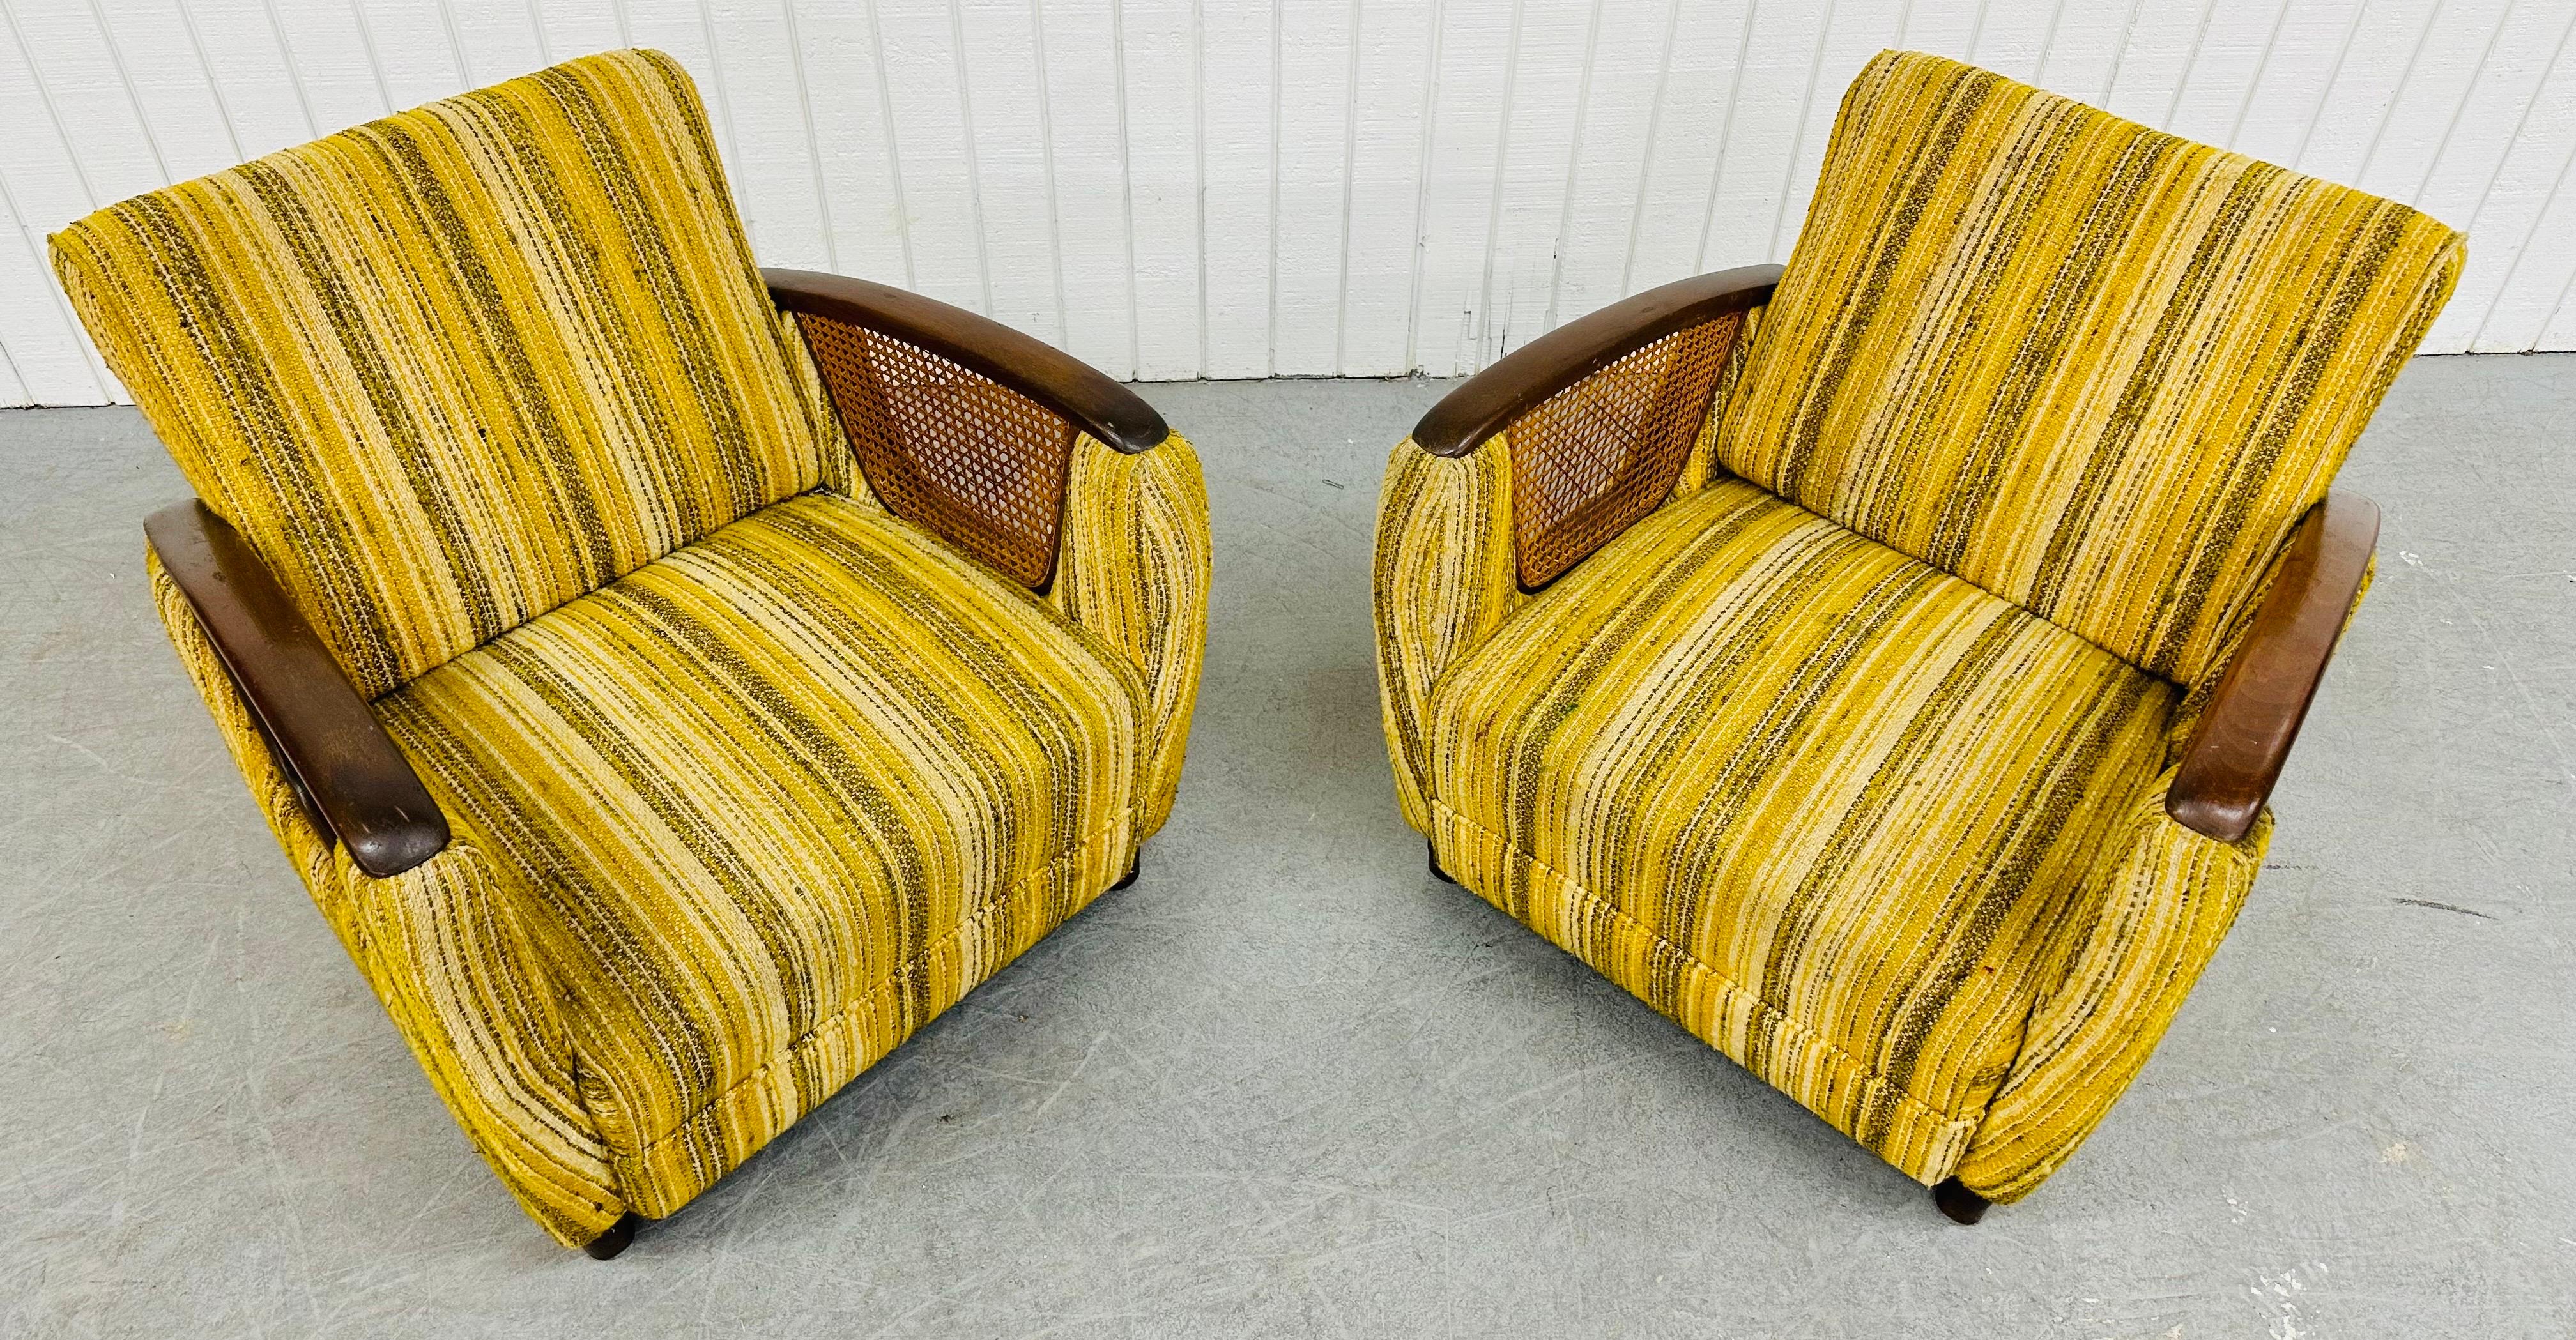 20th Century Mid-Century Modern Deco Style Club Chairs - Set of 2 For Sale